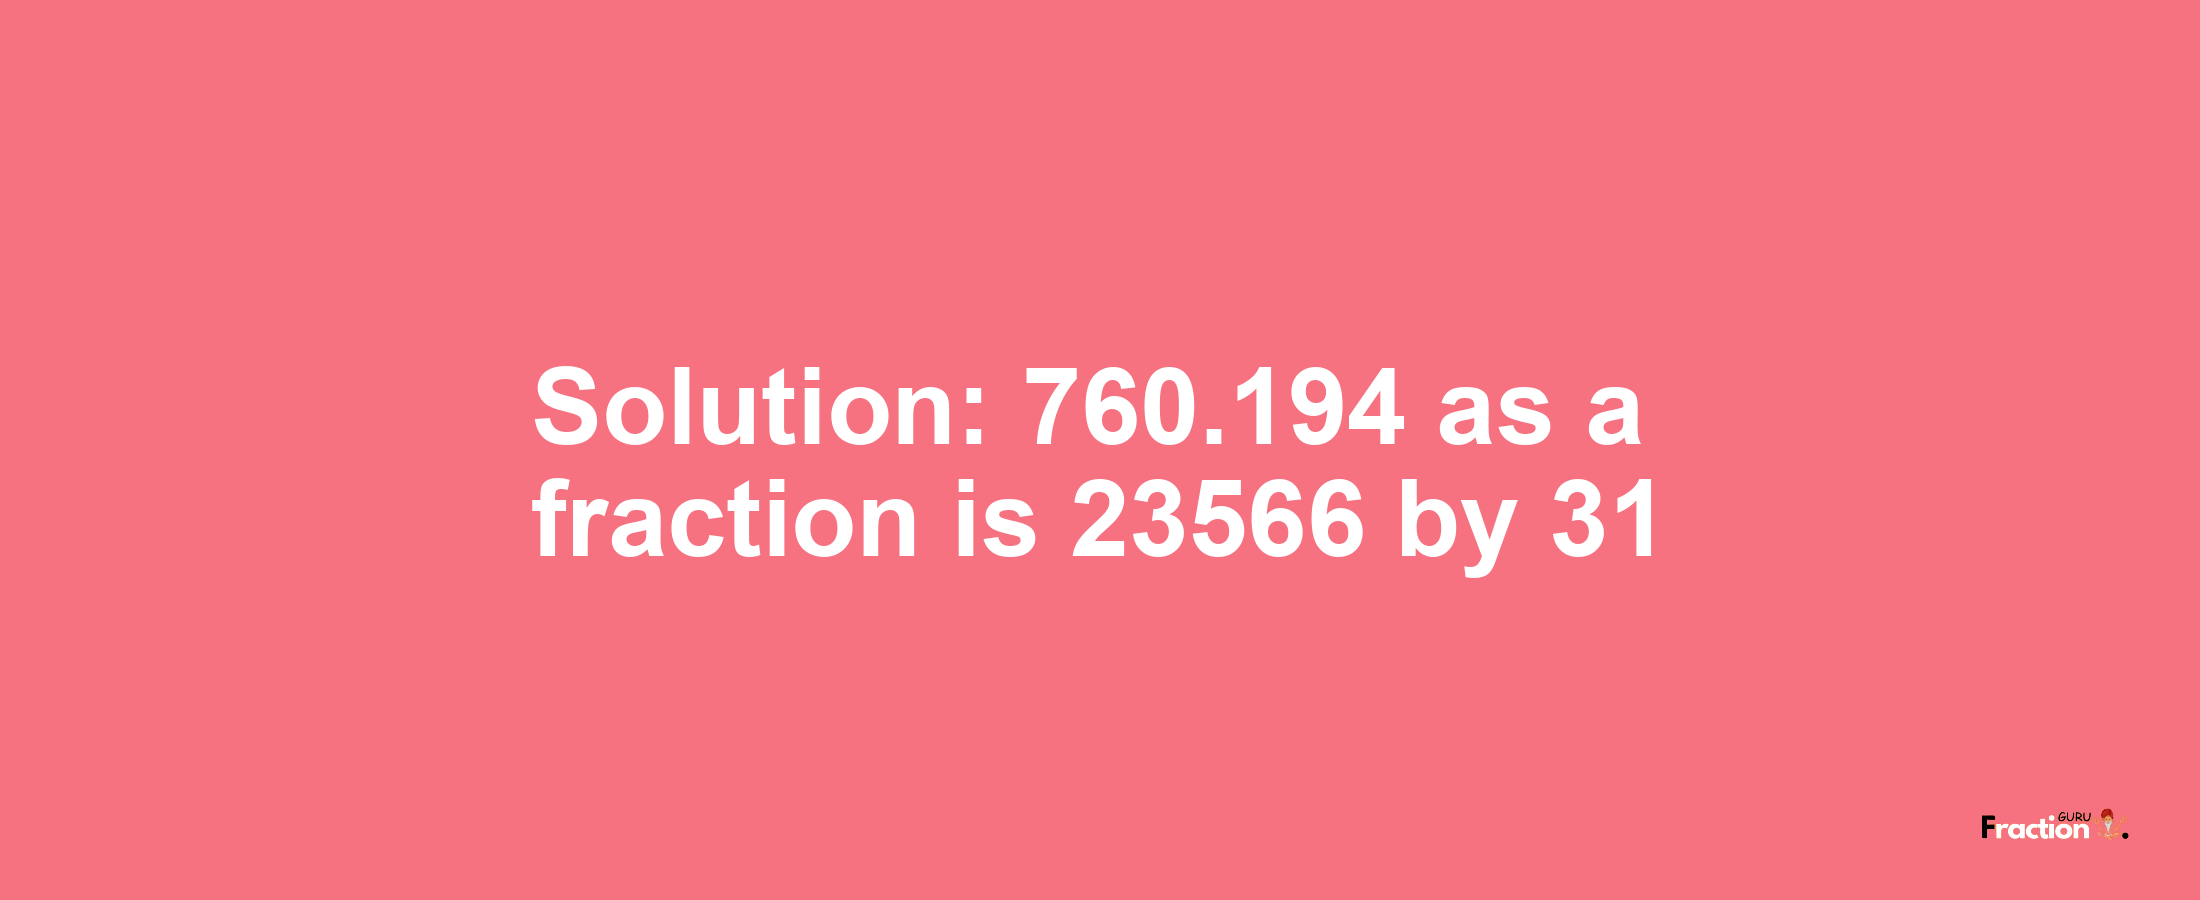 Solution:760.194 as a fraction is 23566/31